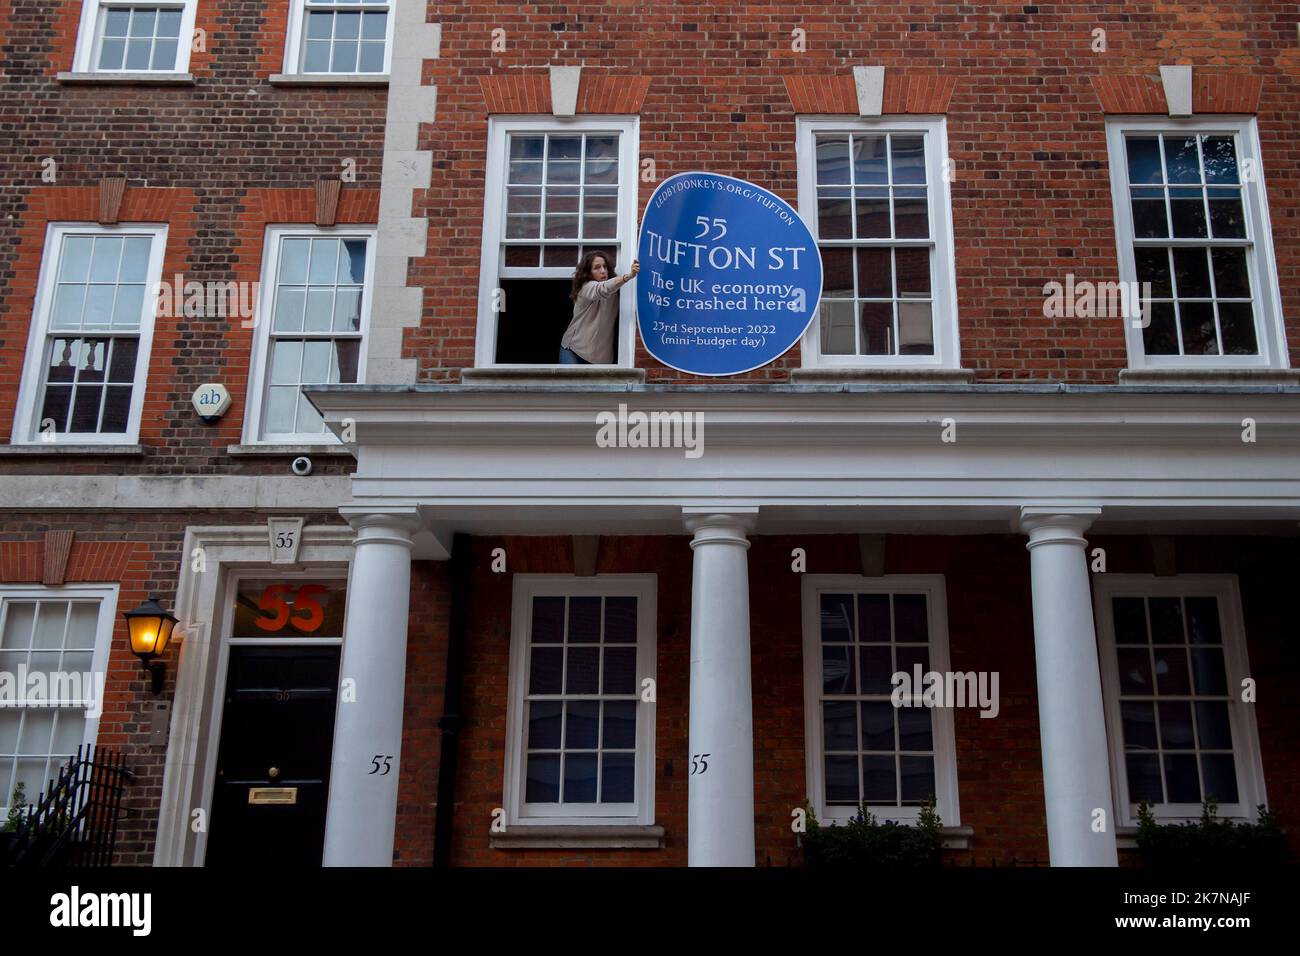 London, UK, 18 October 2022. A woman attempts to remove a blue plaque on 55 Tufton Street in Westminster, which was attached by campaigners from Led By Donkeys. The building is home to several free market groups that were instrumental in Kwarsi Kwarteng's mini budget. Credit: David Mirzoeff/Alamy Live News Stock Photo